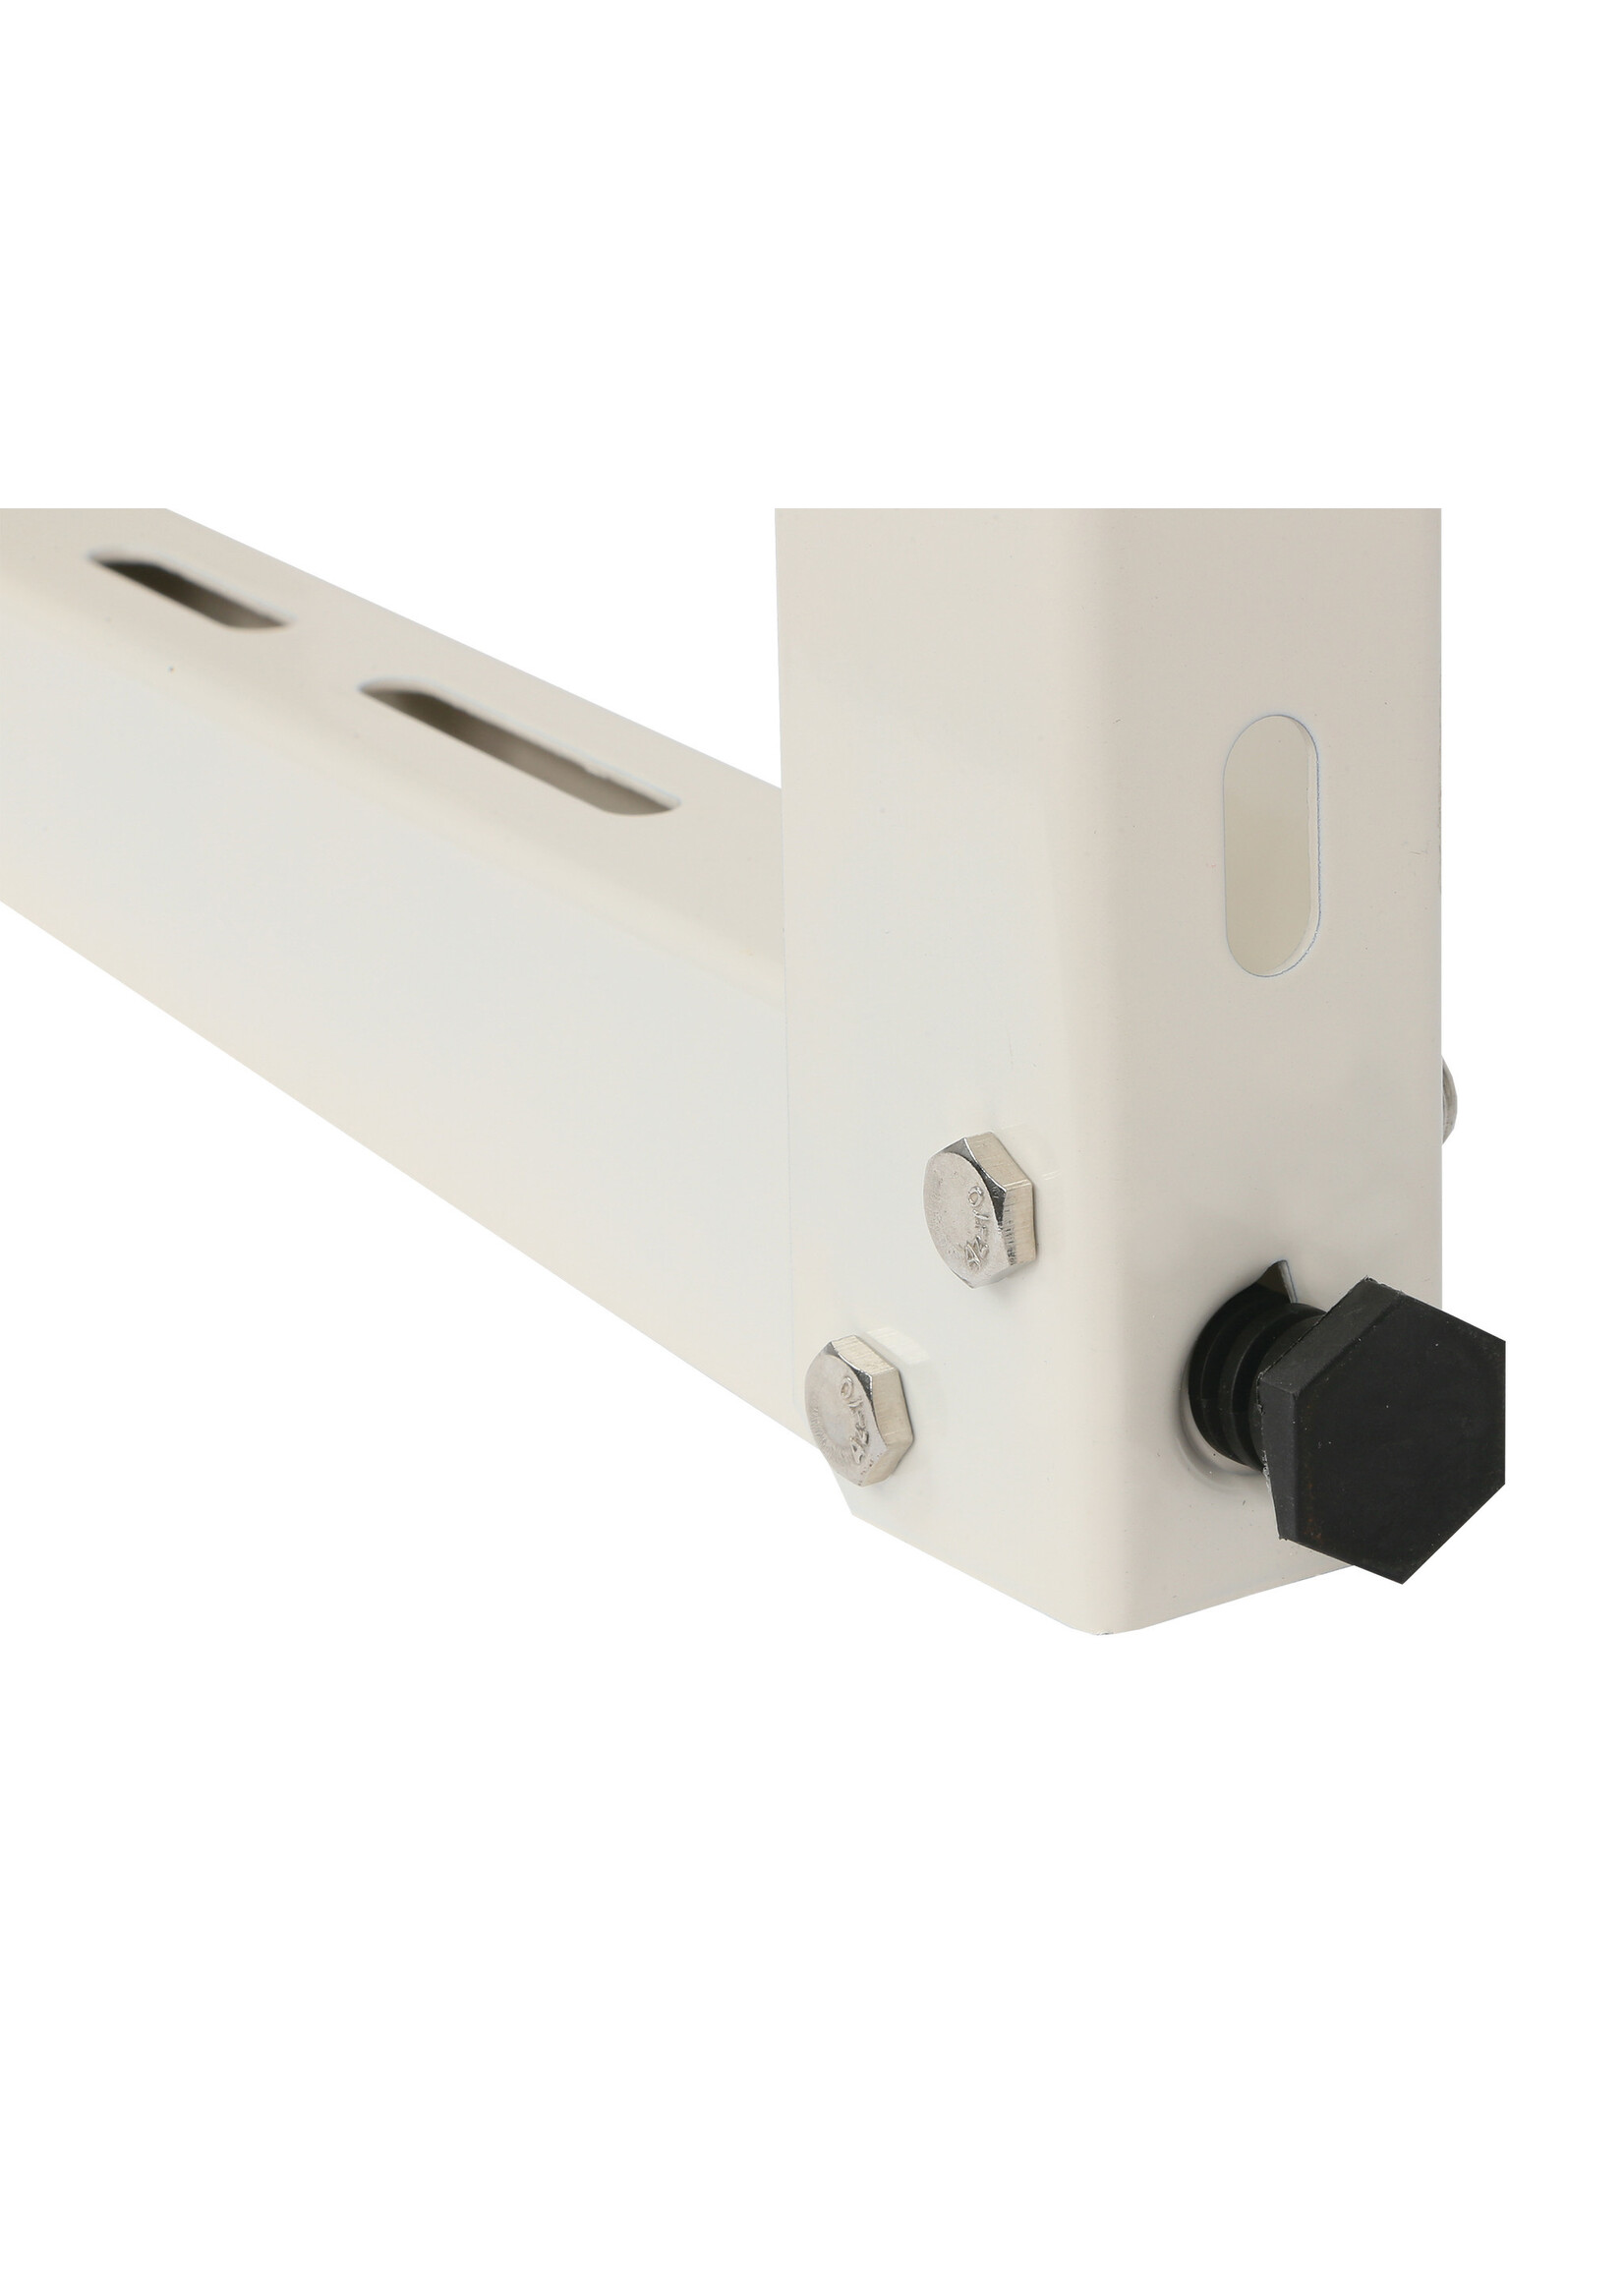 Ideal Air Ideal-Air Universal Wall Bracket (Mini-Split, Dehumidifier, and Water Chillers)